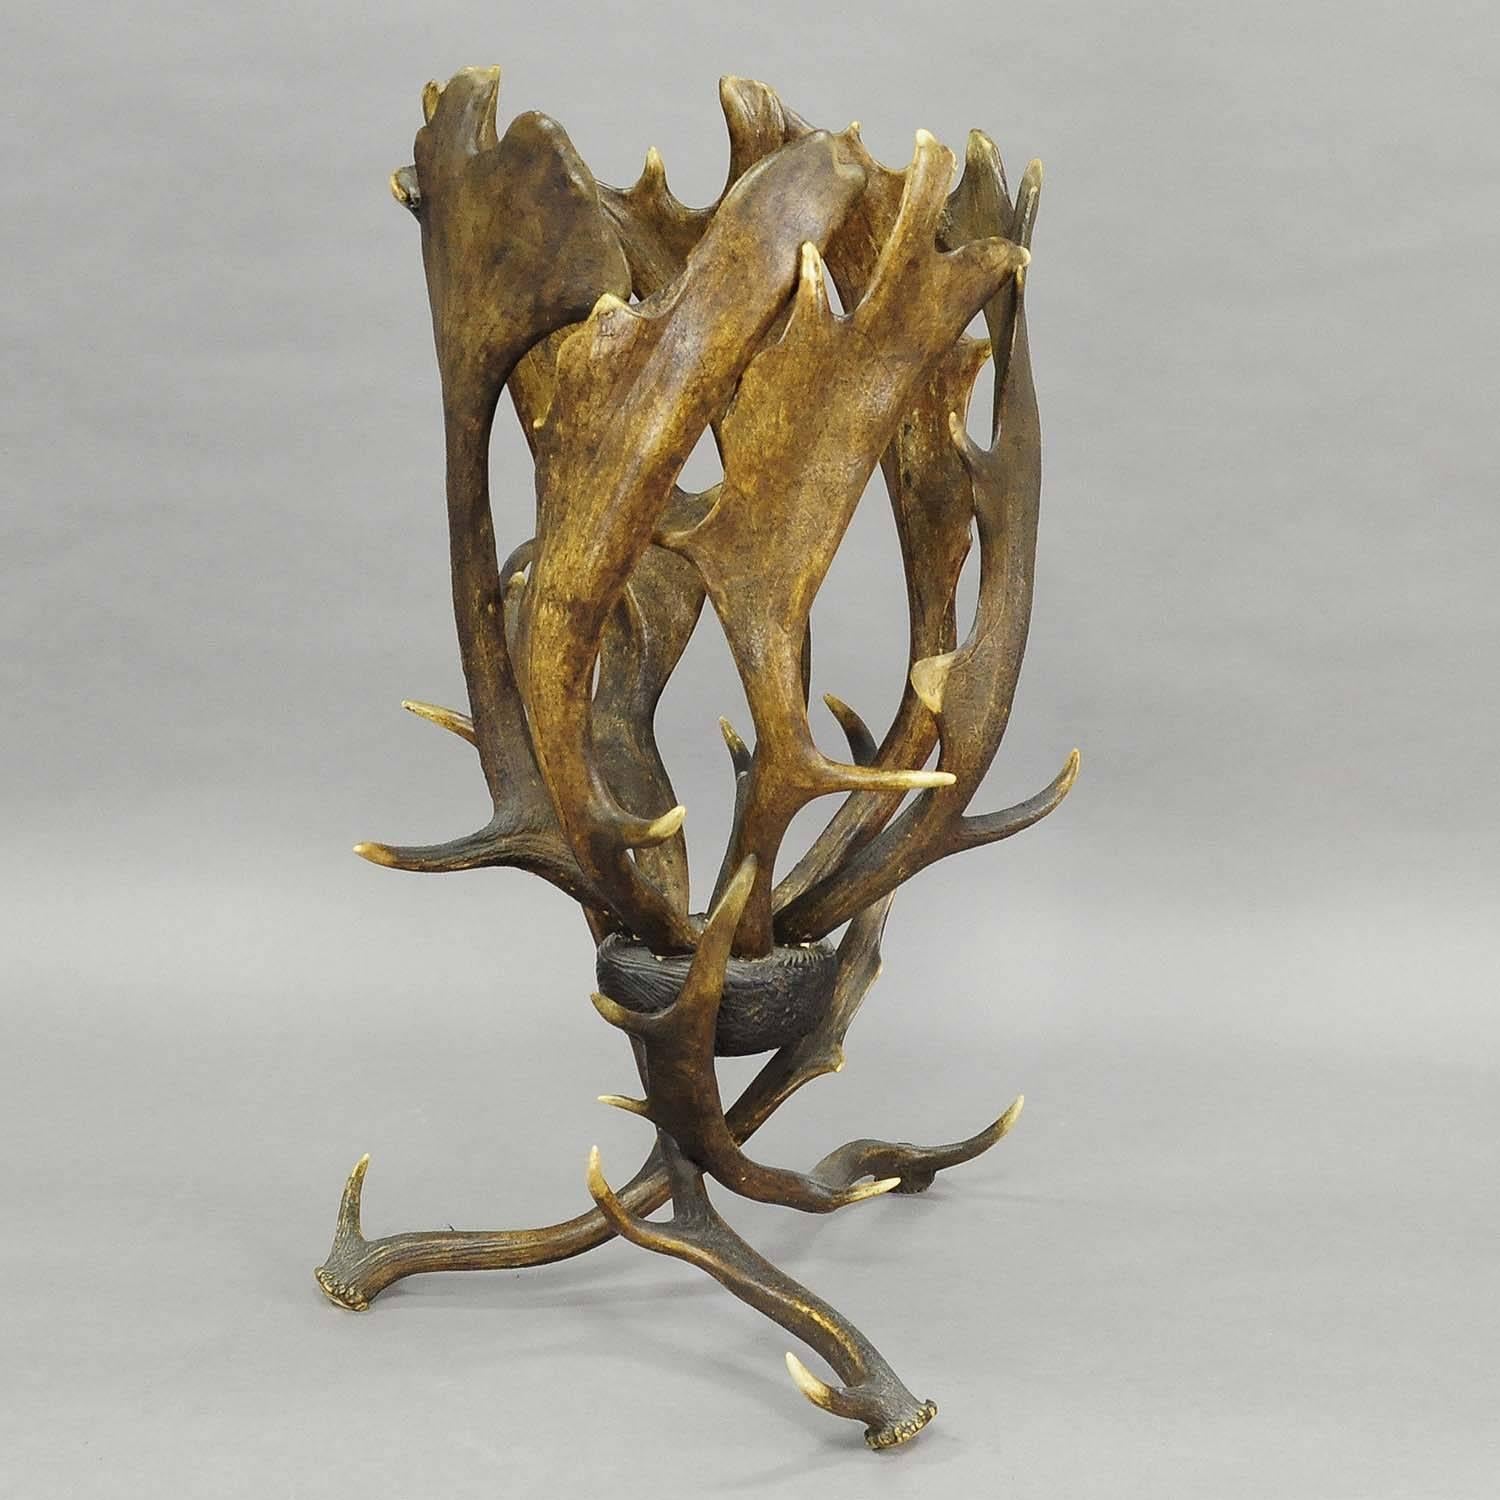 A rustic cabin decor antler basket made of real fallow deer and deer antlers, Germany, manufactured circa 1900.